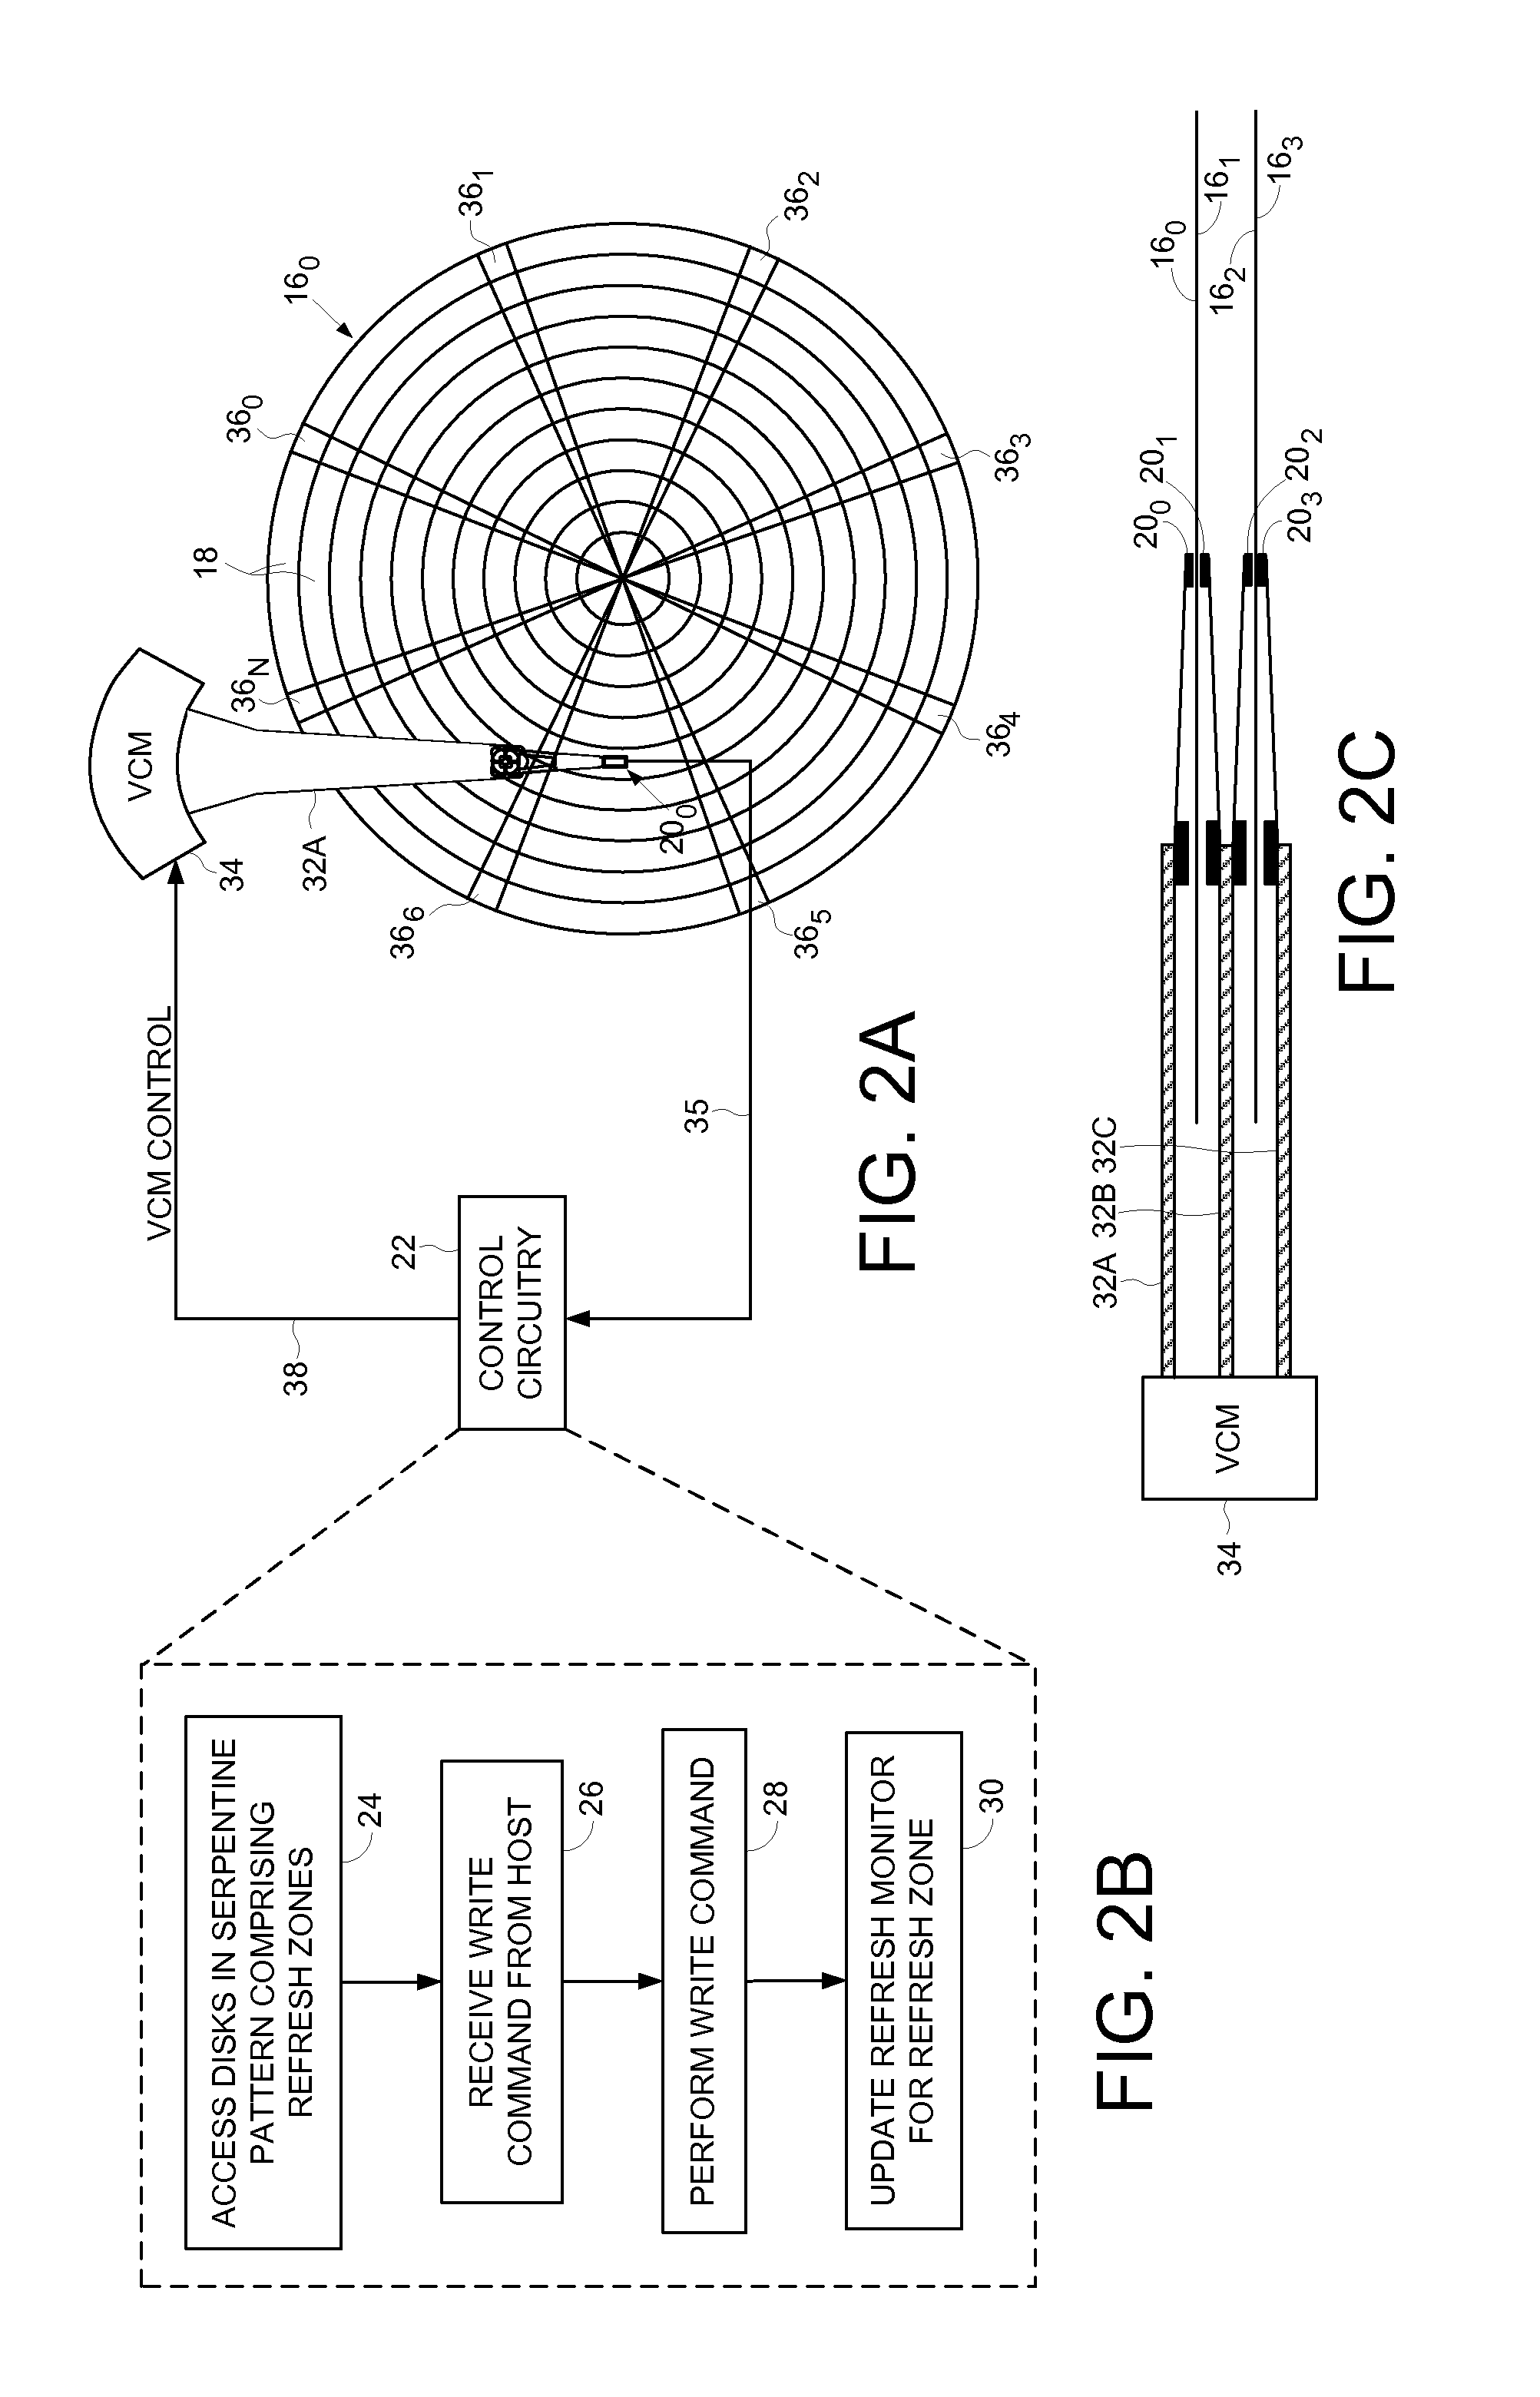 Disk drive refreshing zones based on serpentine access of disk surfaces